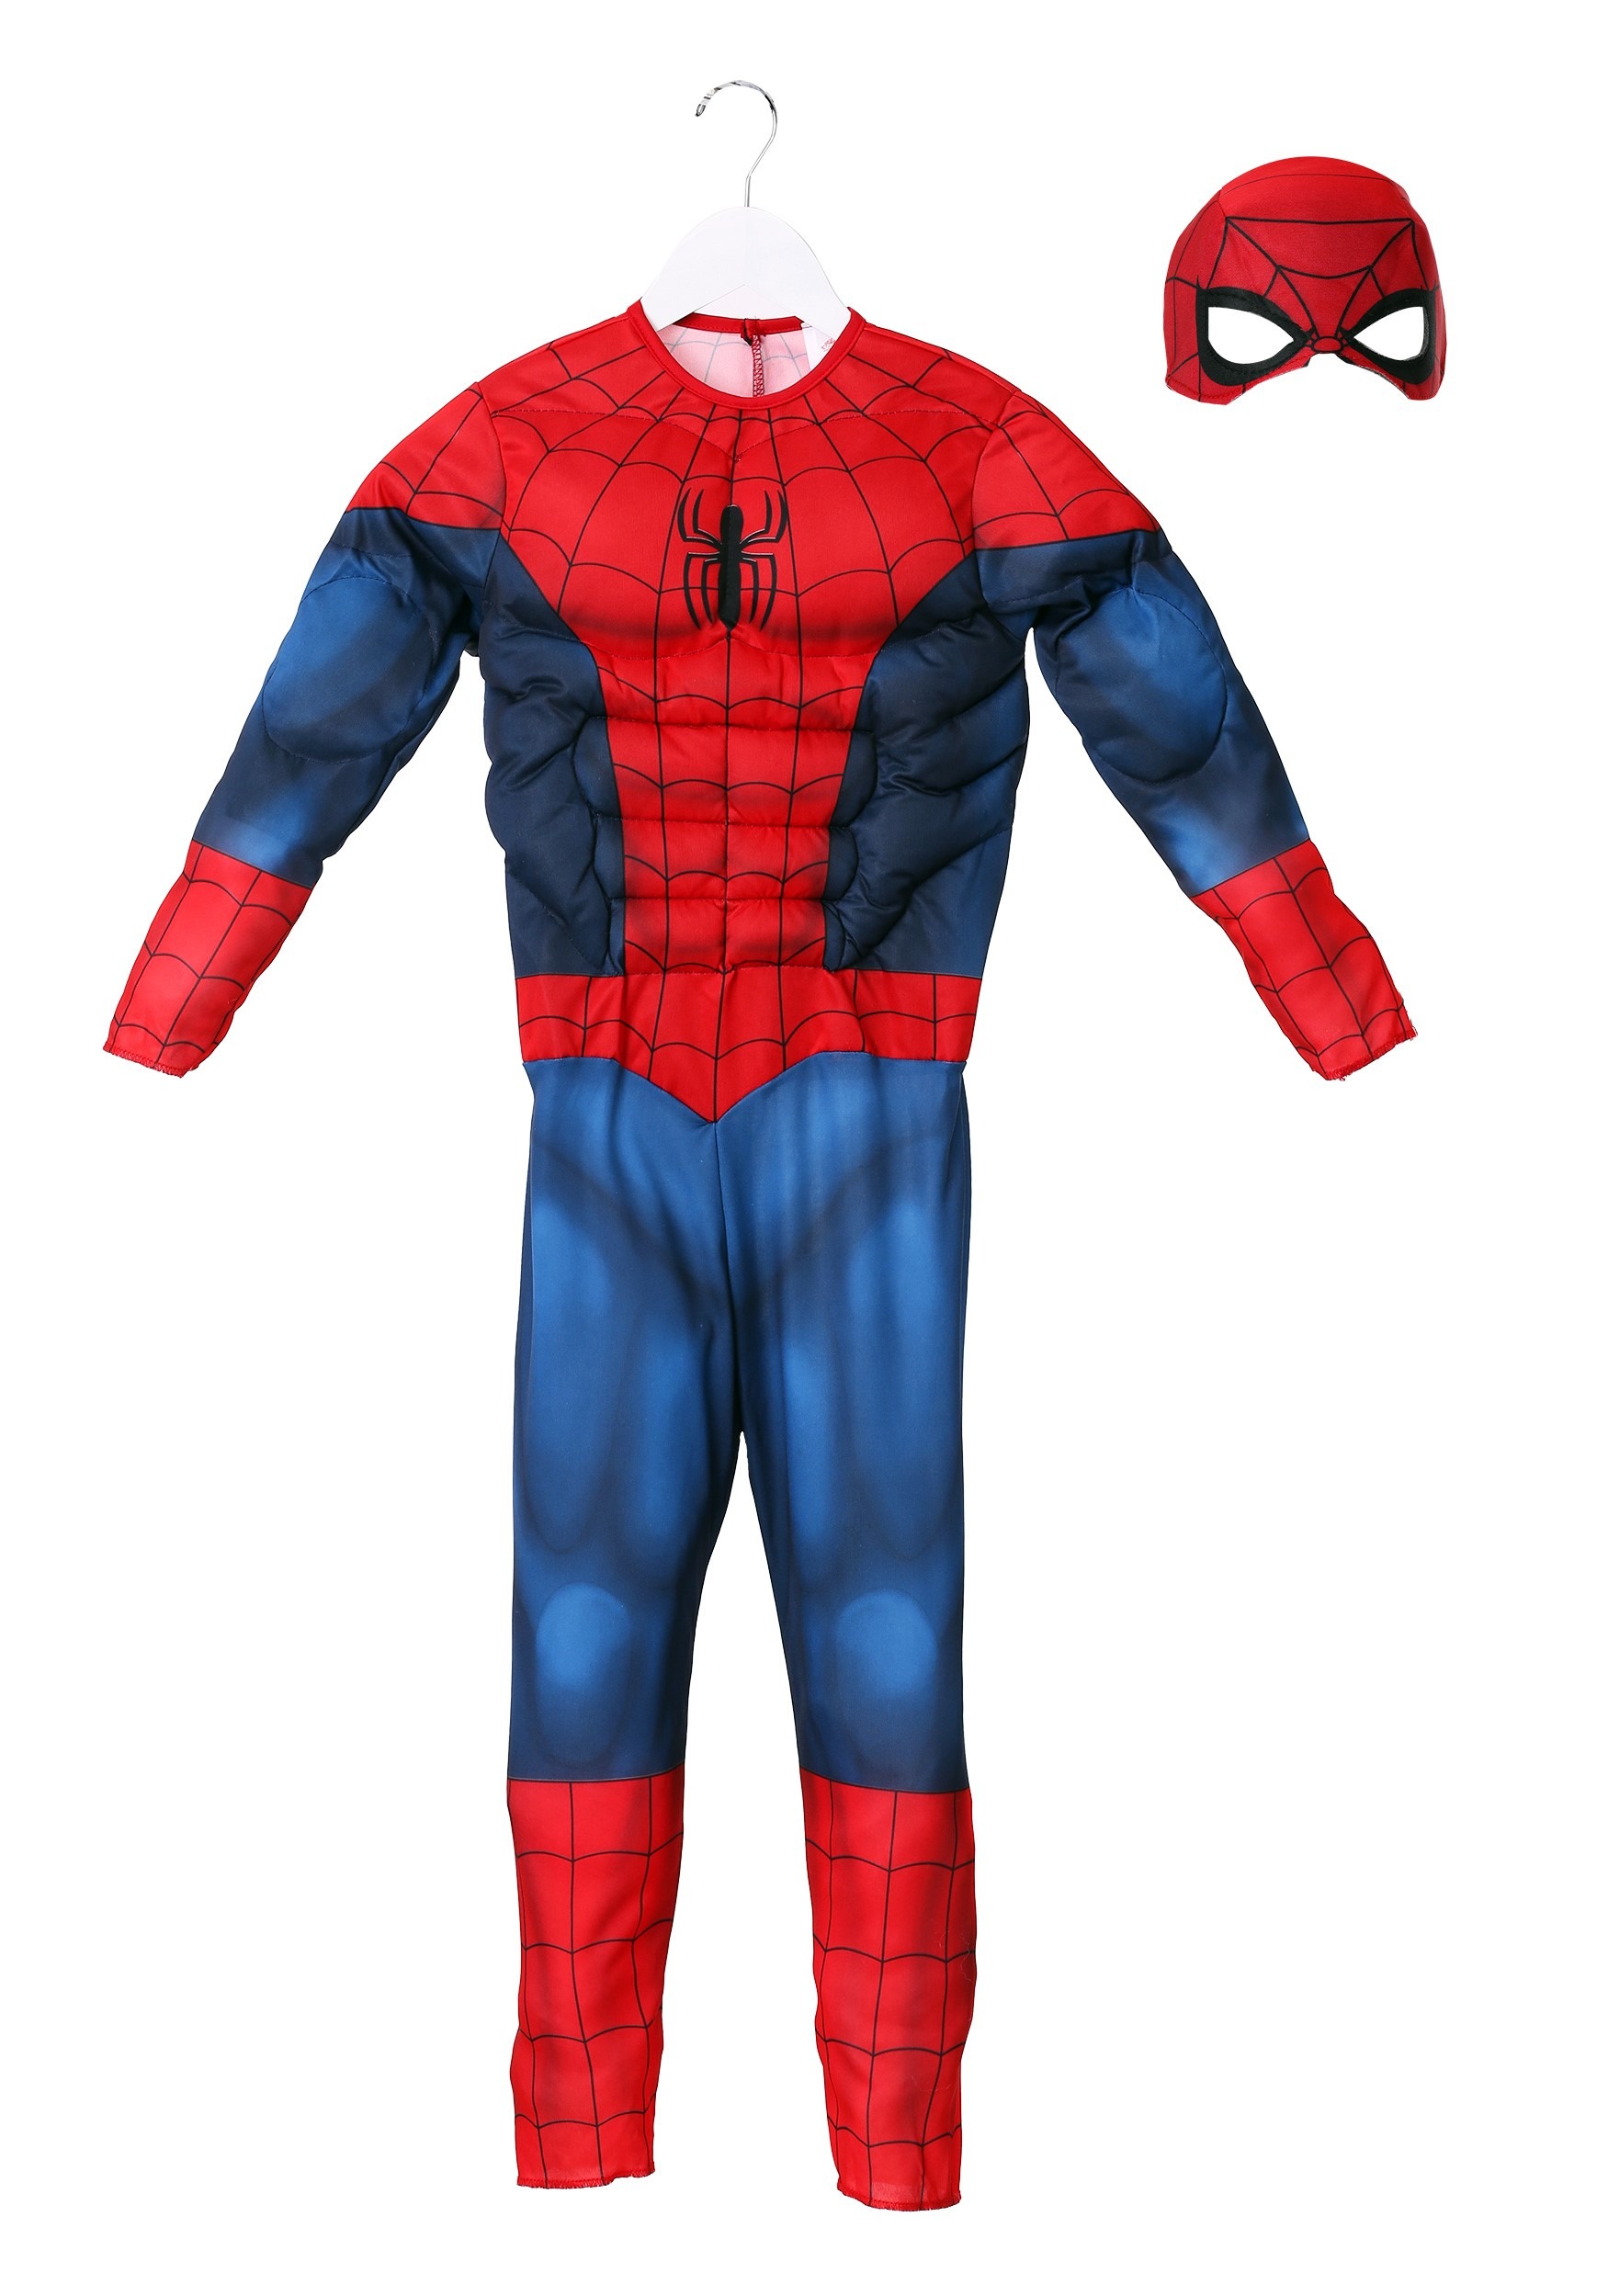 Marvel Spider-Man Costume for Toddlers